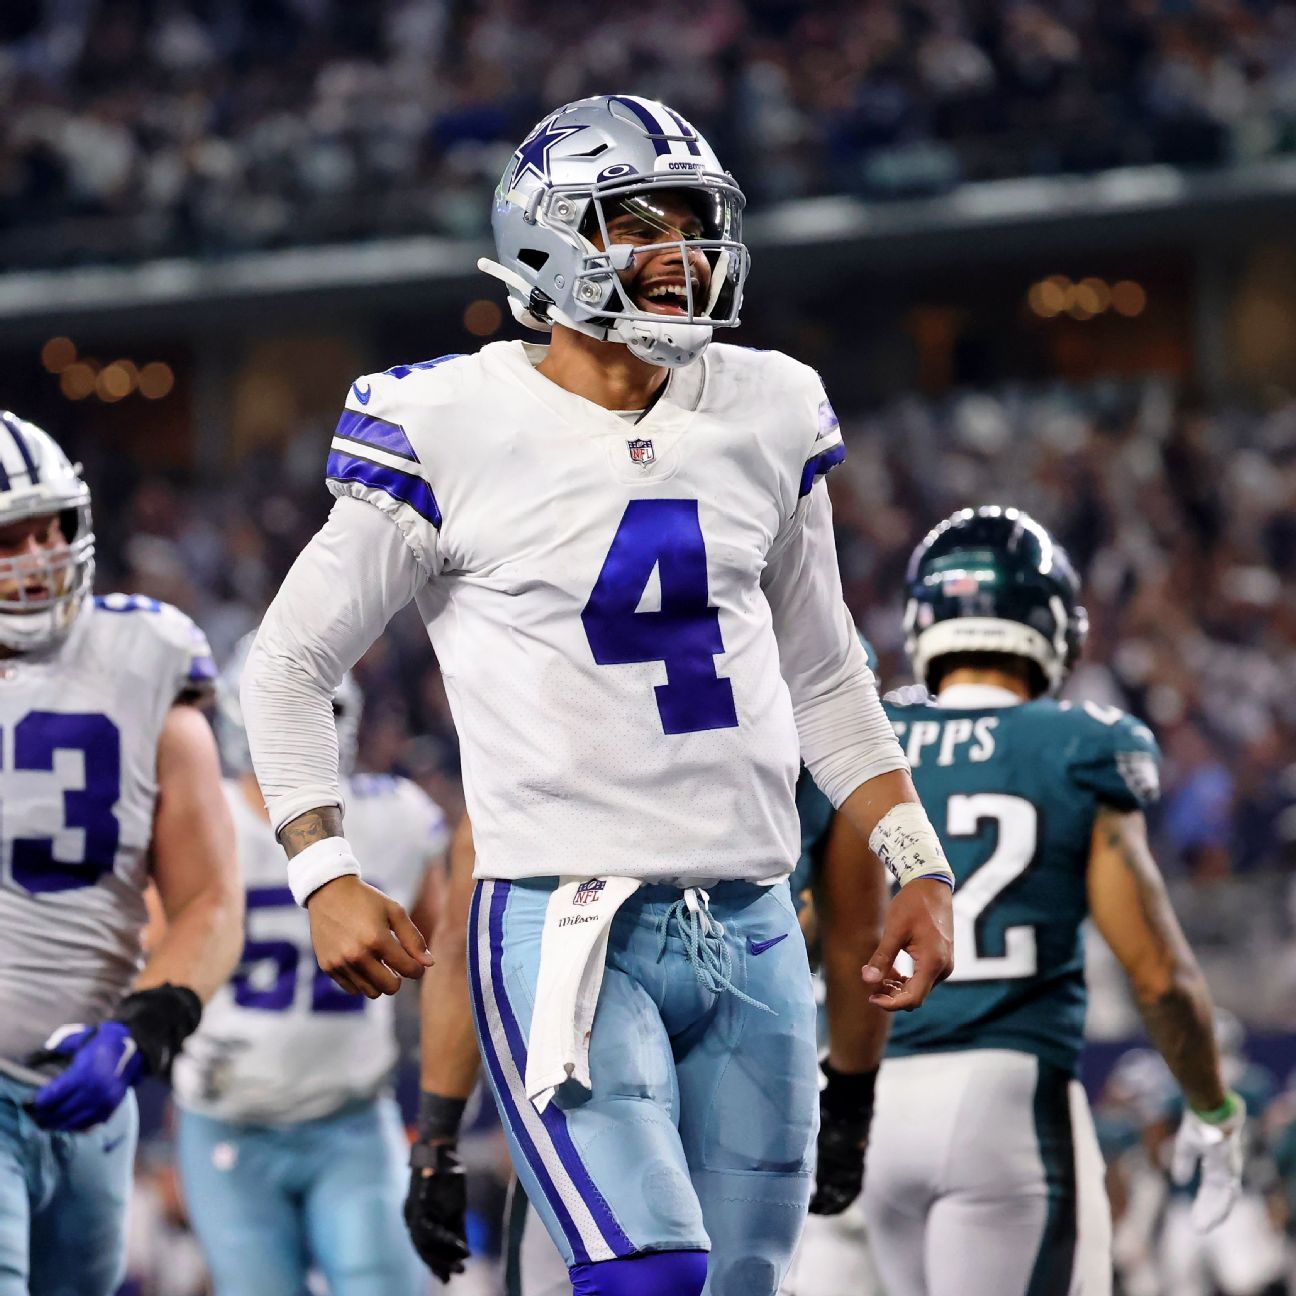 Dallas Cowboys QB Dak Prescott says he’s playing at career-best level after ‘special’ return to AT&T Stadium – ESPN